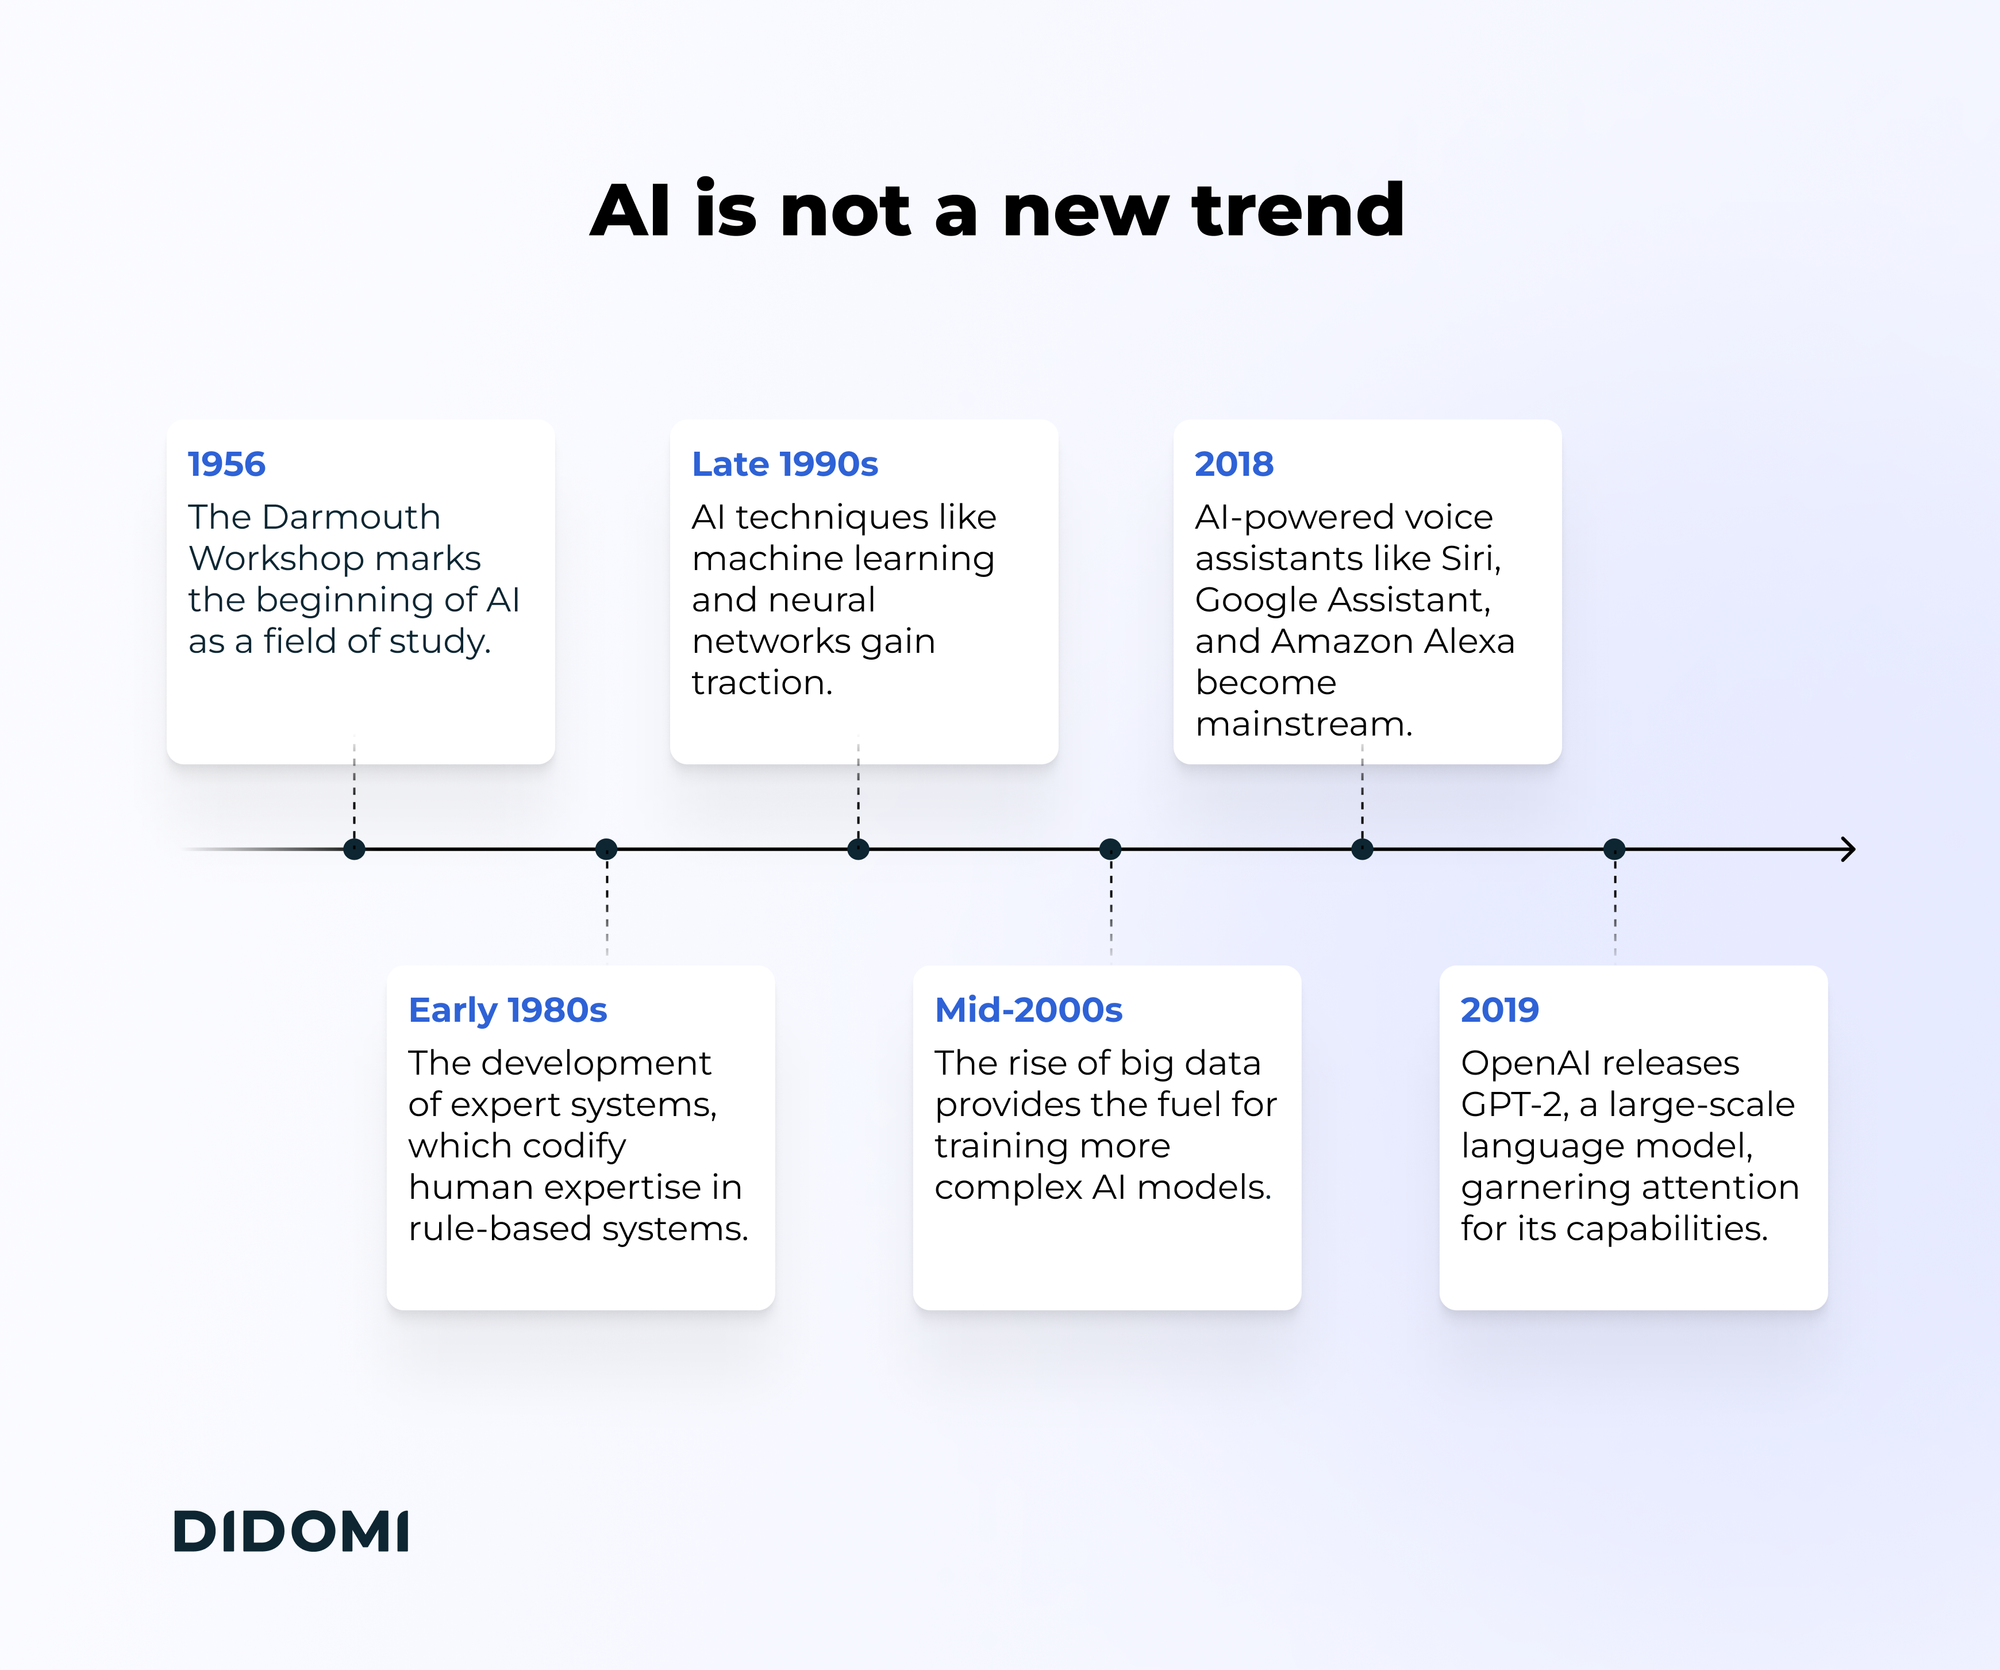 A timeline of Artificial Intelligence with the title "AI is not a new trend" and 6 key dates. 1956: The Dartmouth Workshop marks the beginning of AI as a field of study. Early 1980s The development of expert systems, which codify human expertise in rule-based systems. Late 1990s AI techniques like machine learning and neural networks gain traction. Mid-2000s The rise of big data provides the fuel for training more complex AI models. 2018 AI-powered voice assistants like Siri, Google Assistant, and Amazon Alexa become mainstream. 2019 OpenAI releases GPT-2, a large-scale language model, garnering attention for its capabilities.